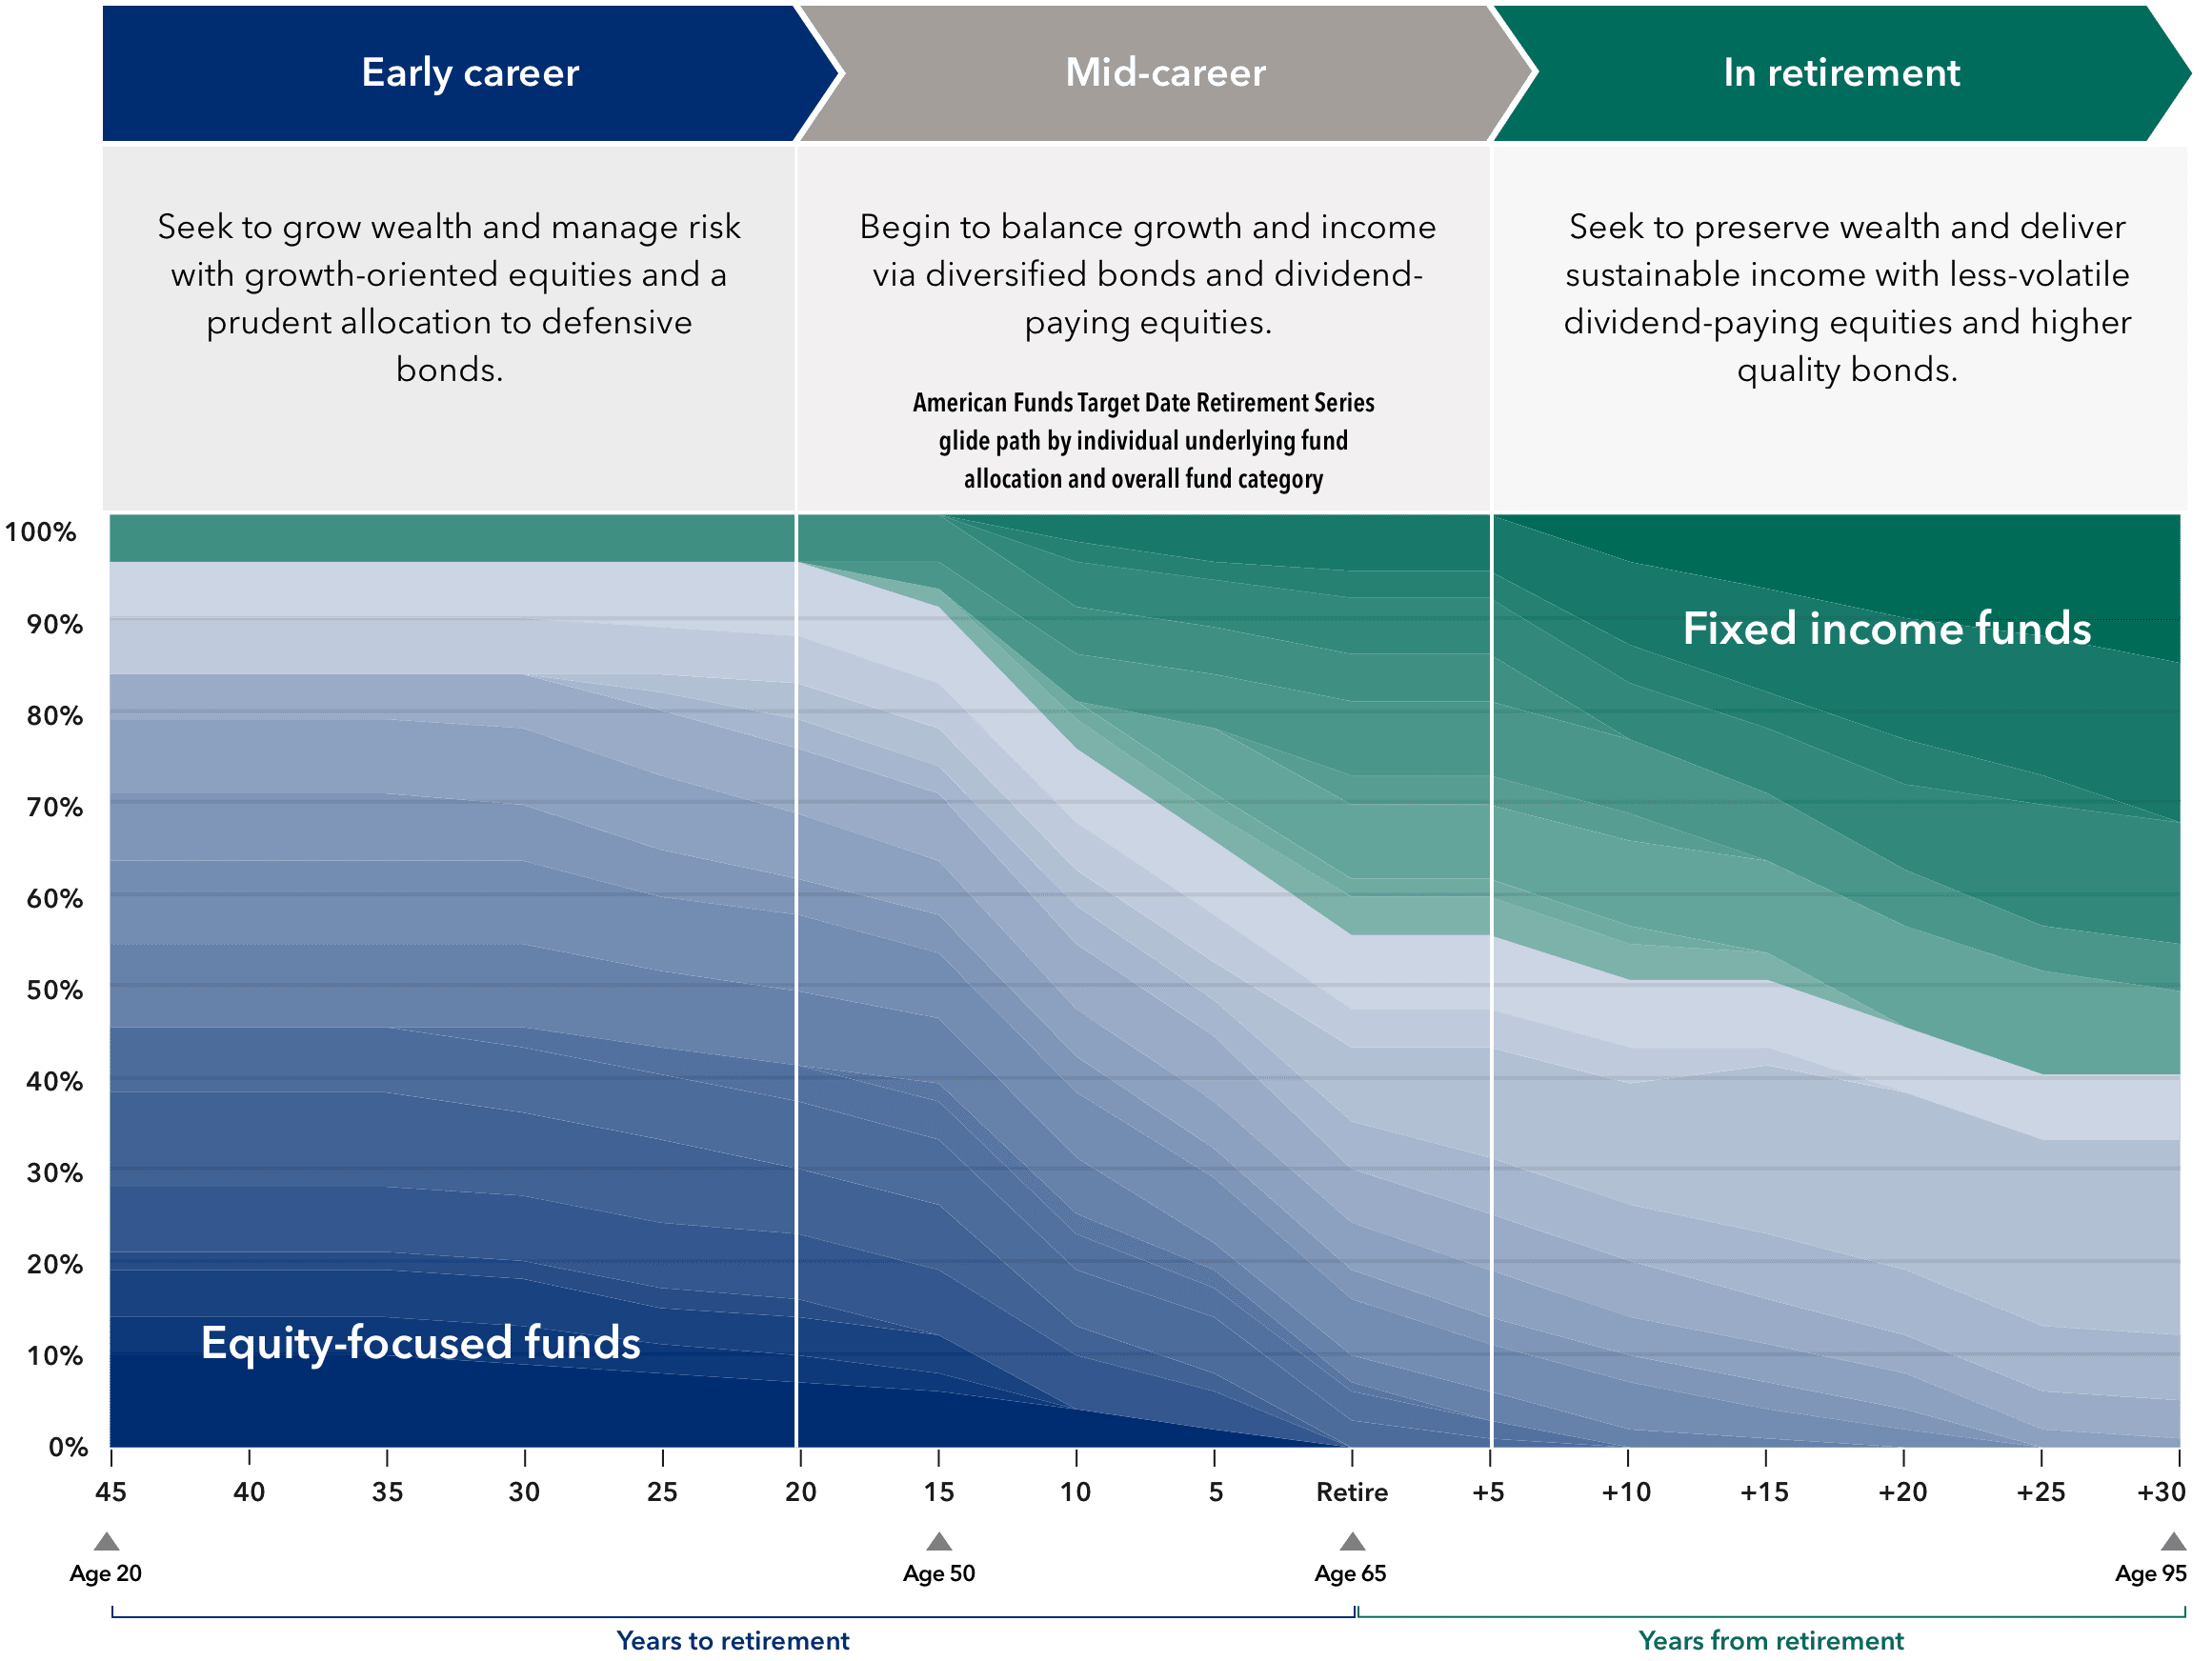 This chart illustrates our strategic glide path shifting from a higher equity to a higher fixed income allocation over time while also explaining the shift in philosophy from wealth creation to wealth preservation. The early career stage seeks to grow wealth and manage risk with growth-oriented equities and a prudent allocation to defensive bonds. The mid-career stage begins to balance growth and income with diversified bonds and dividend-paying equities. The in-retirement stage seeks to preserve wealth and deliver sustainable income with less-volatile dividend-paying equities and higher quality bonds.